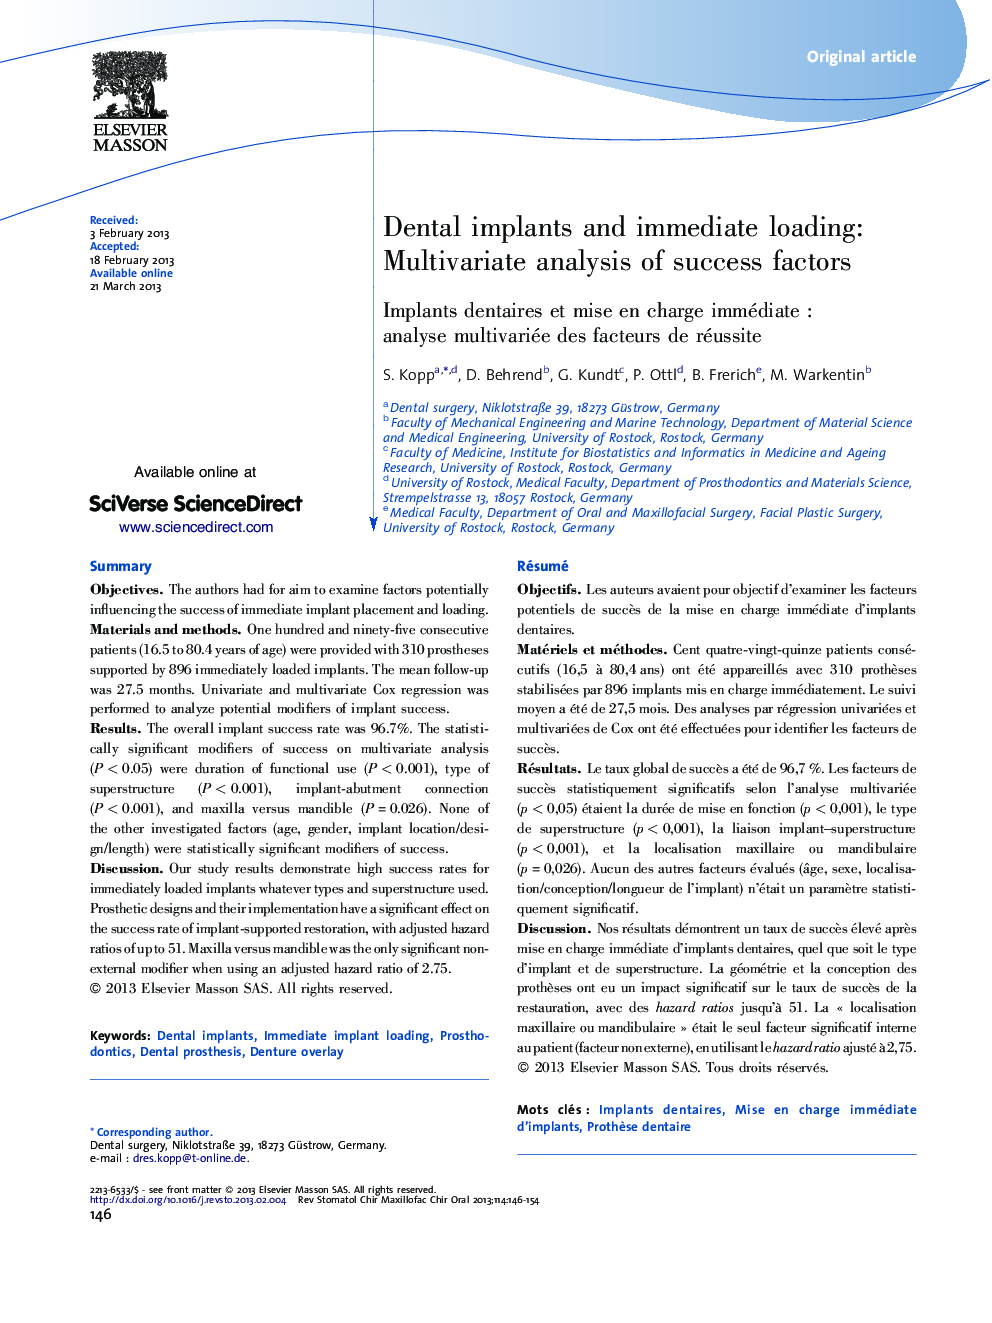 Dental implants and immediate loading: Multivariate analysis of success factors